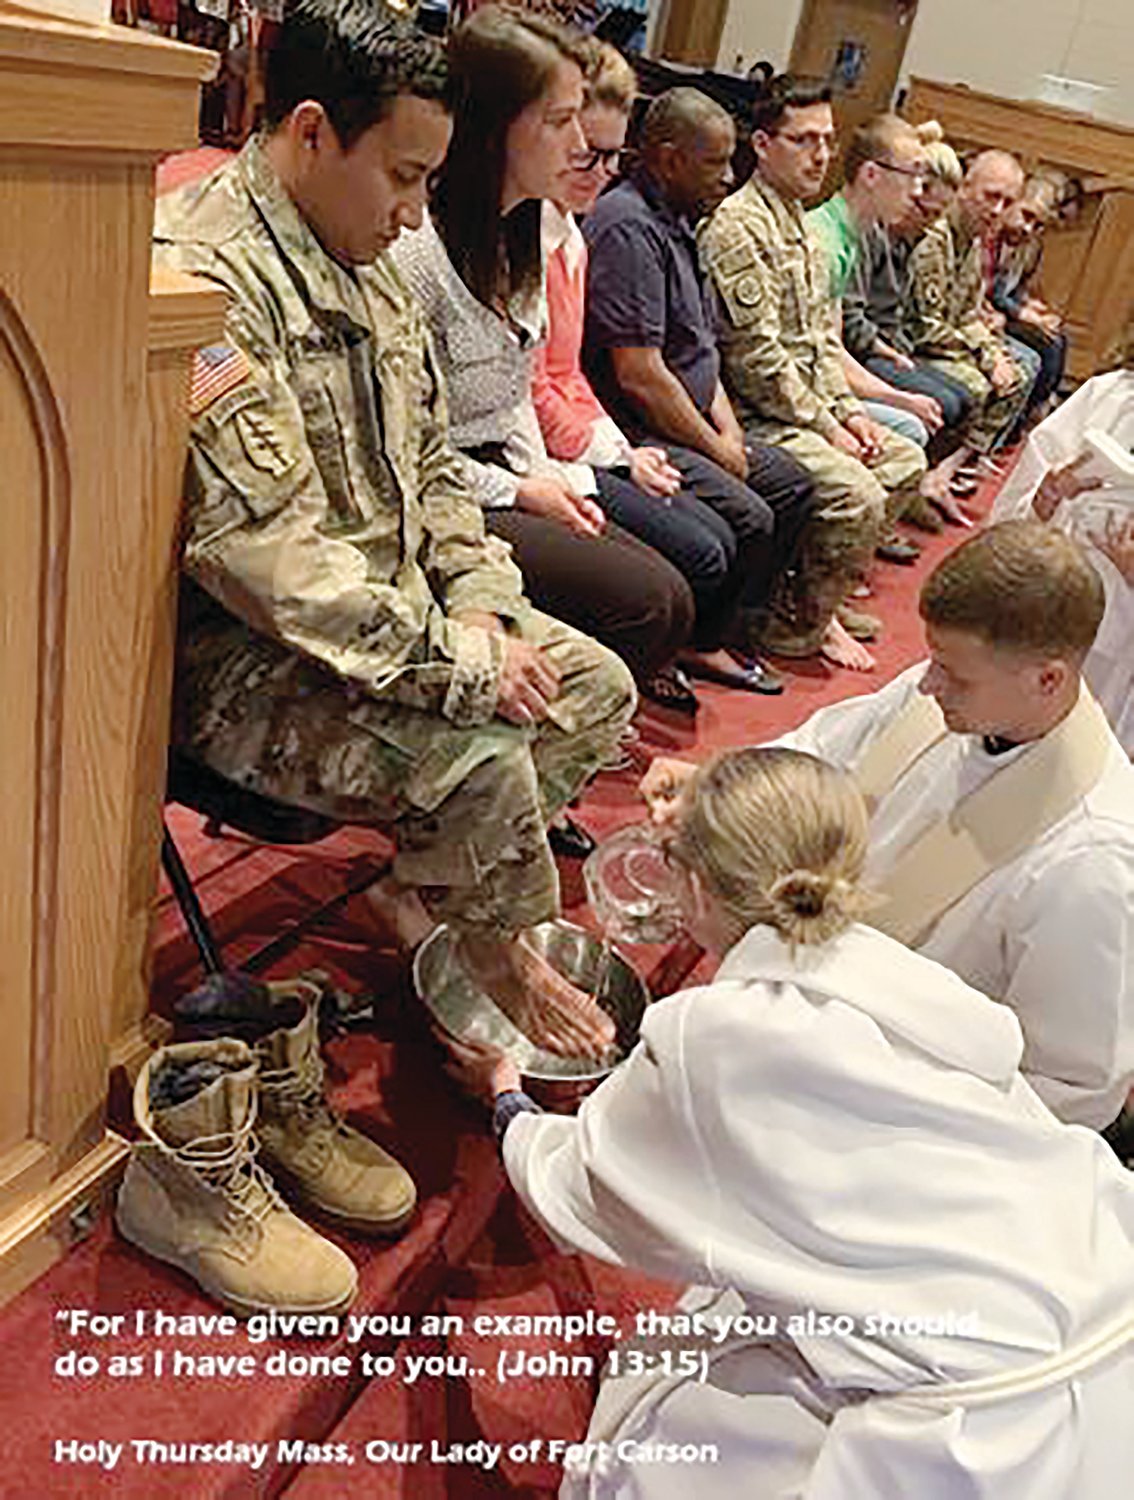 He washes the feet of soldiers and family members on Holy Thursday.